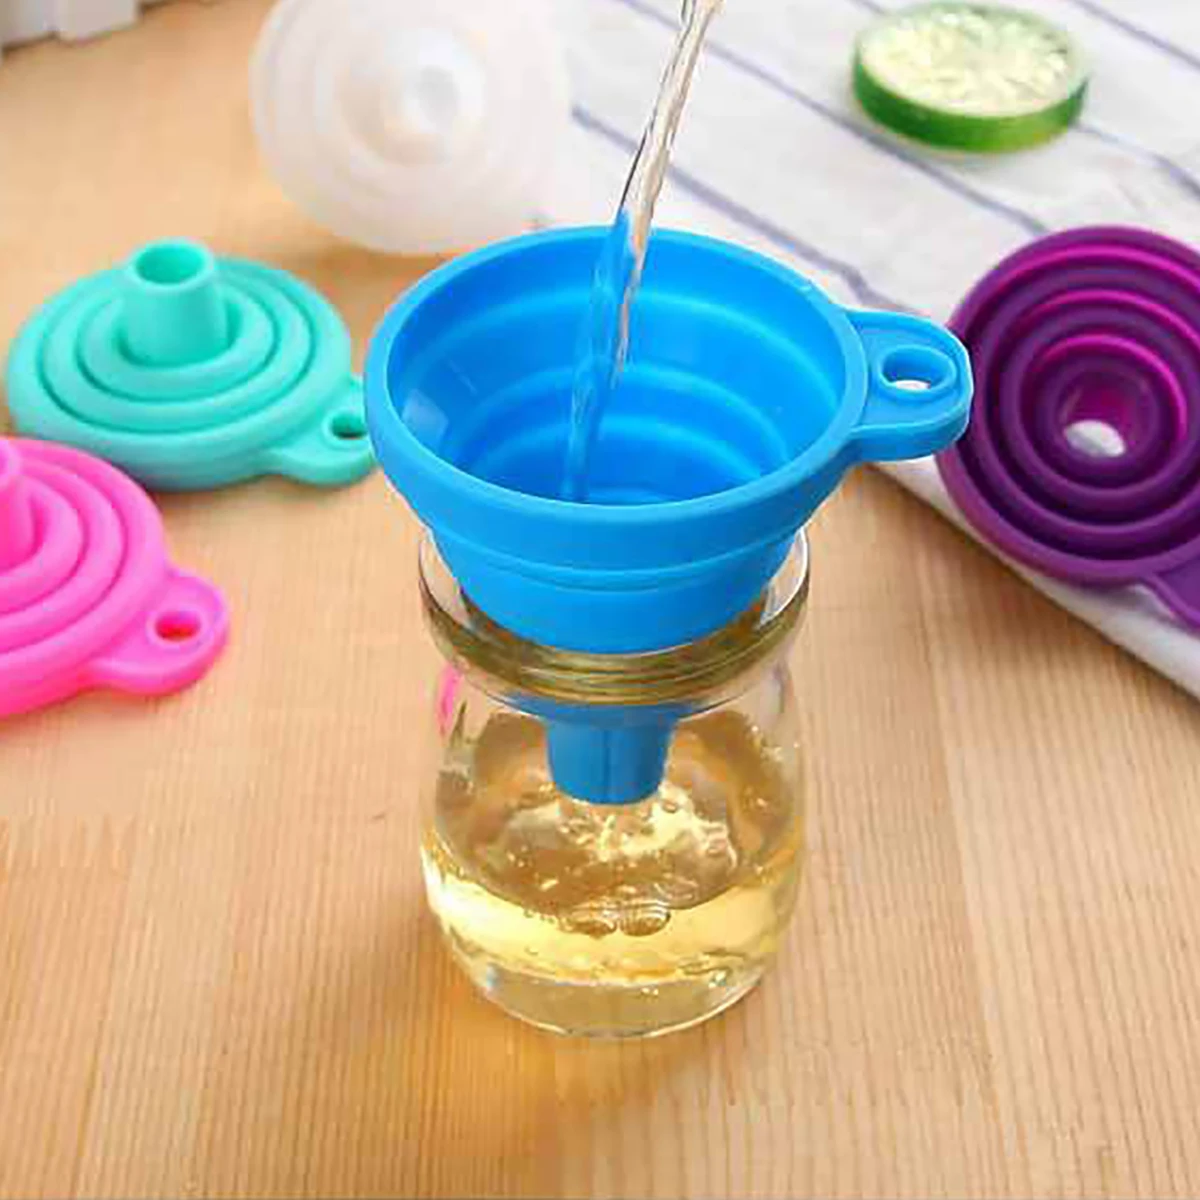 

Mini Silicone Telescopic Foldable Oil Funnel Kitchen Products Materials Fashionable Utensils Useful Accessories Helpers